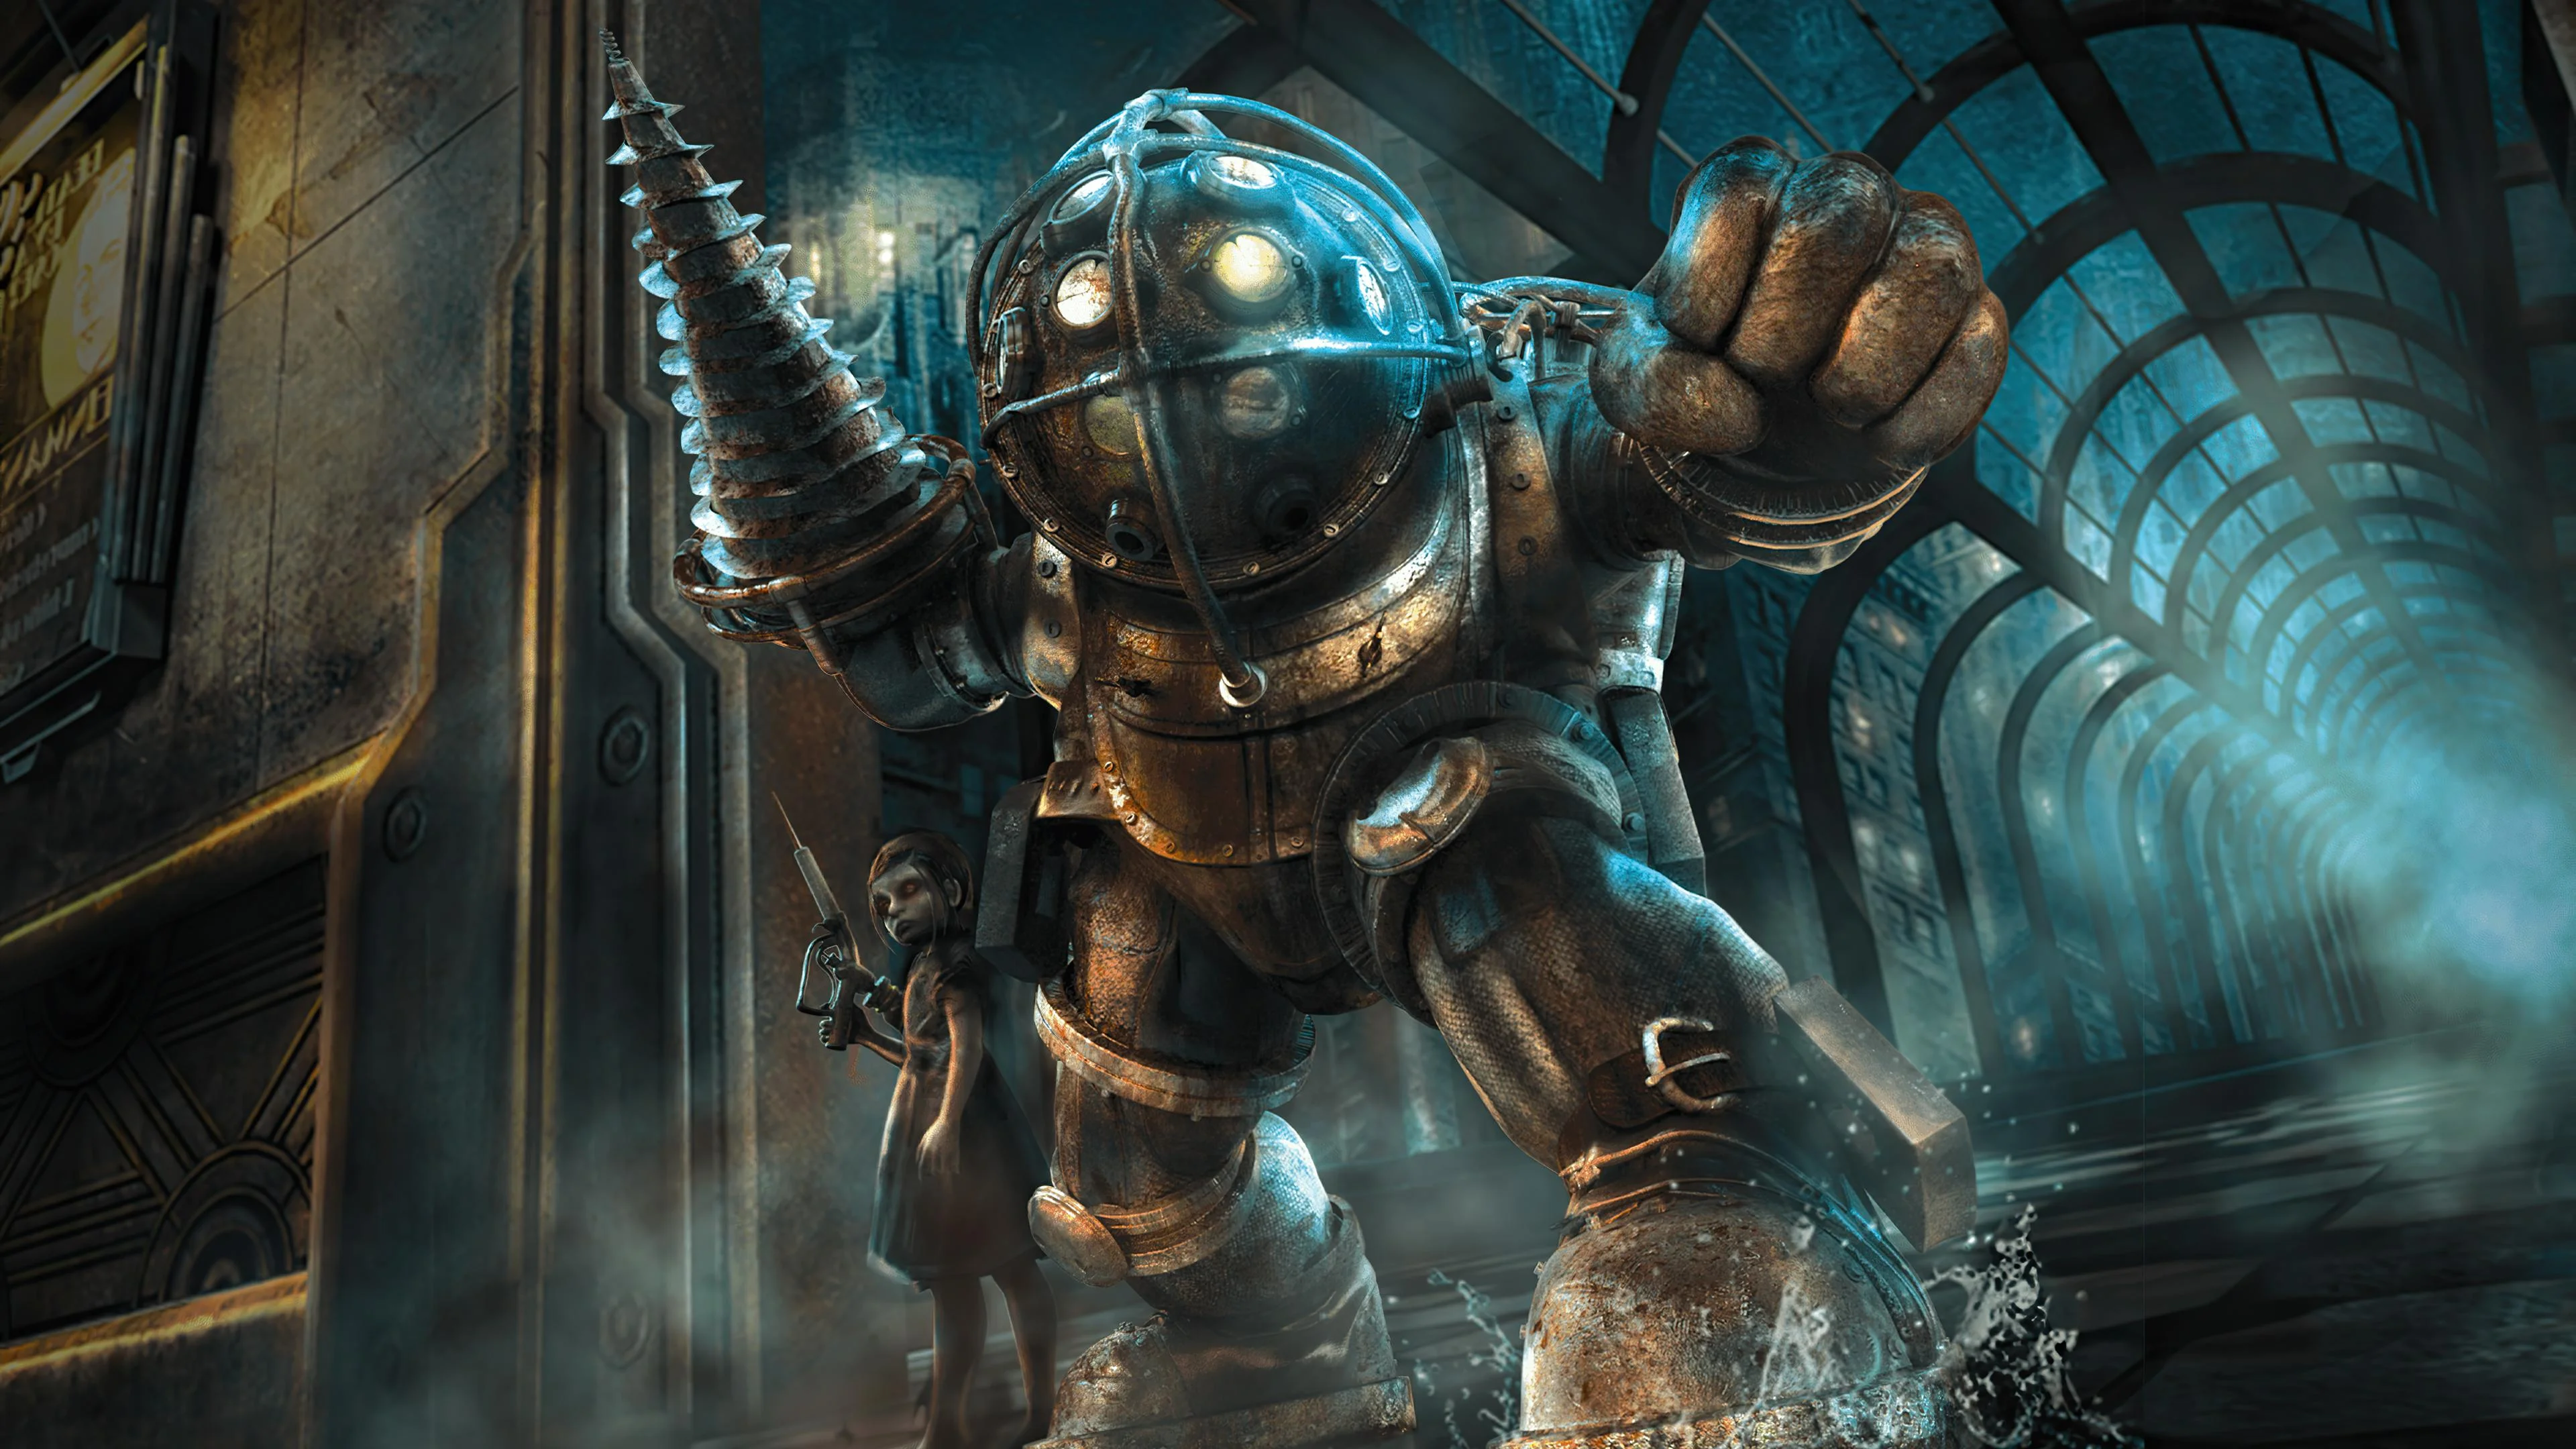 The first BioShock 4 screenshot has appeared online